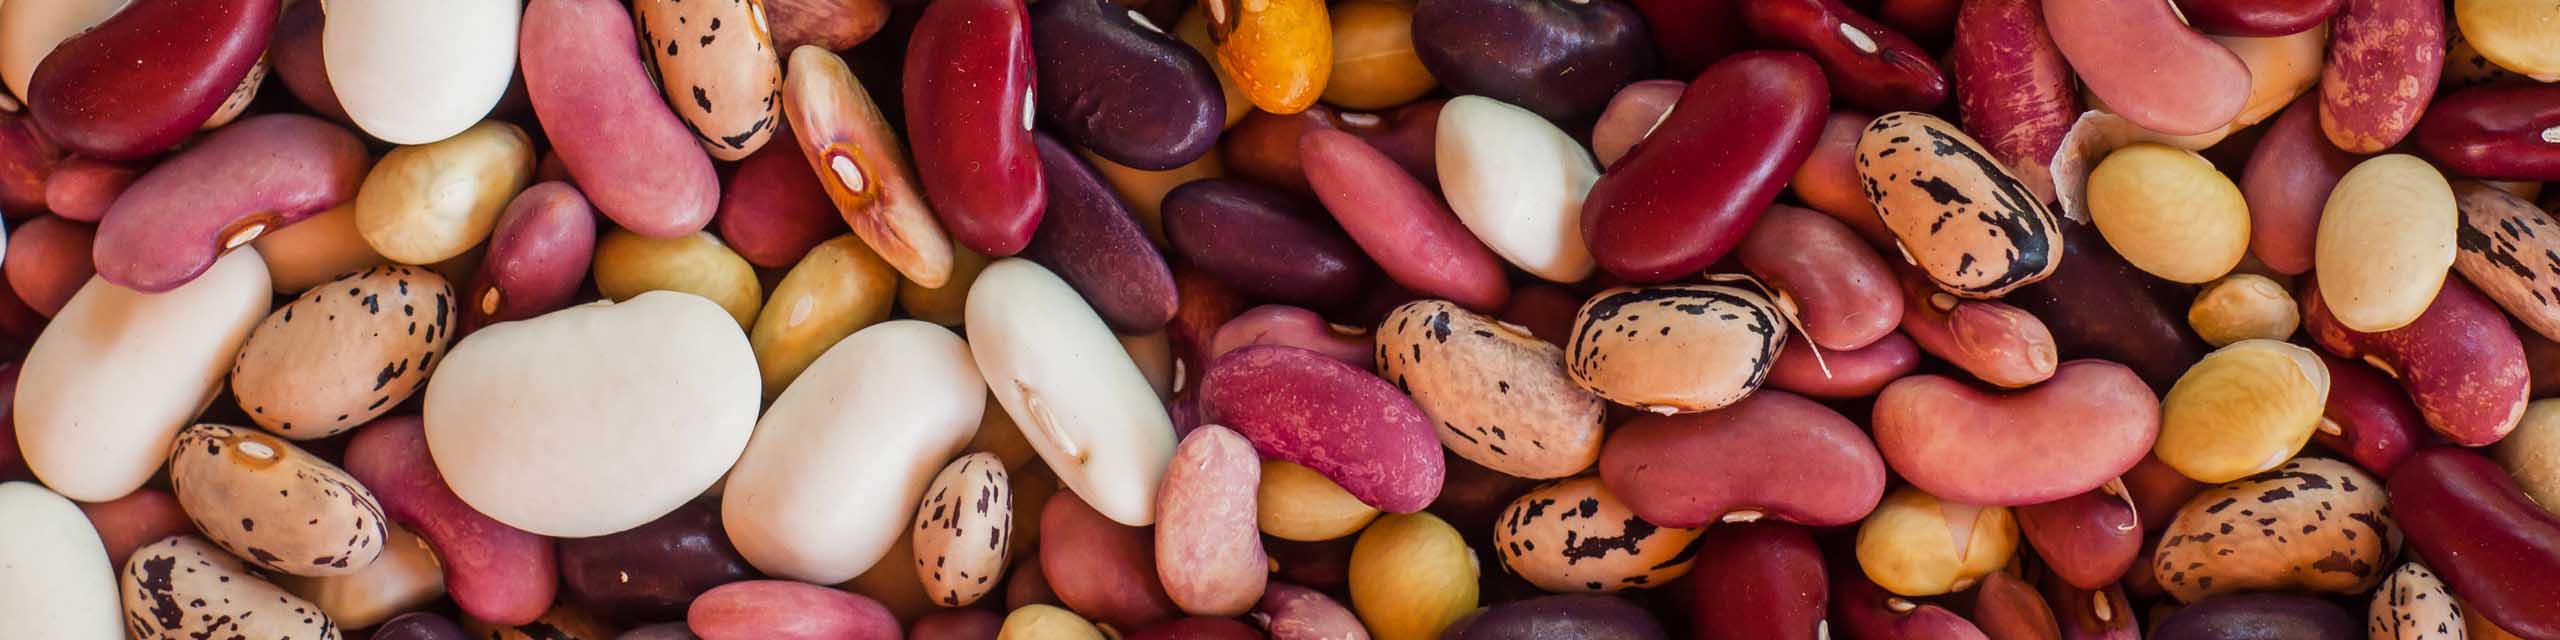 Different types of dried beans in a mix.